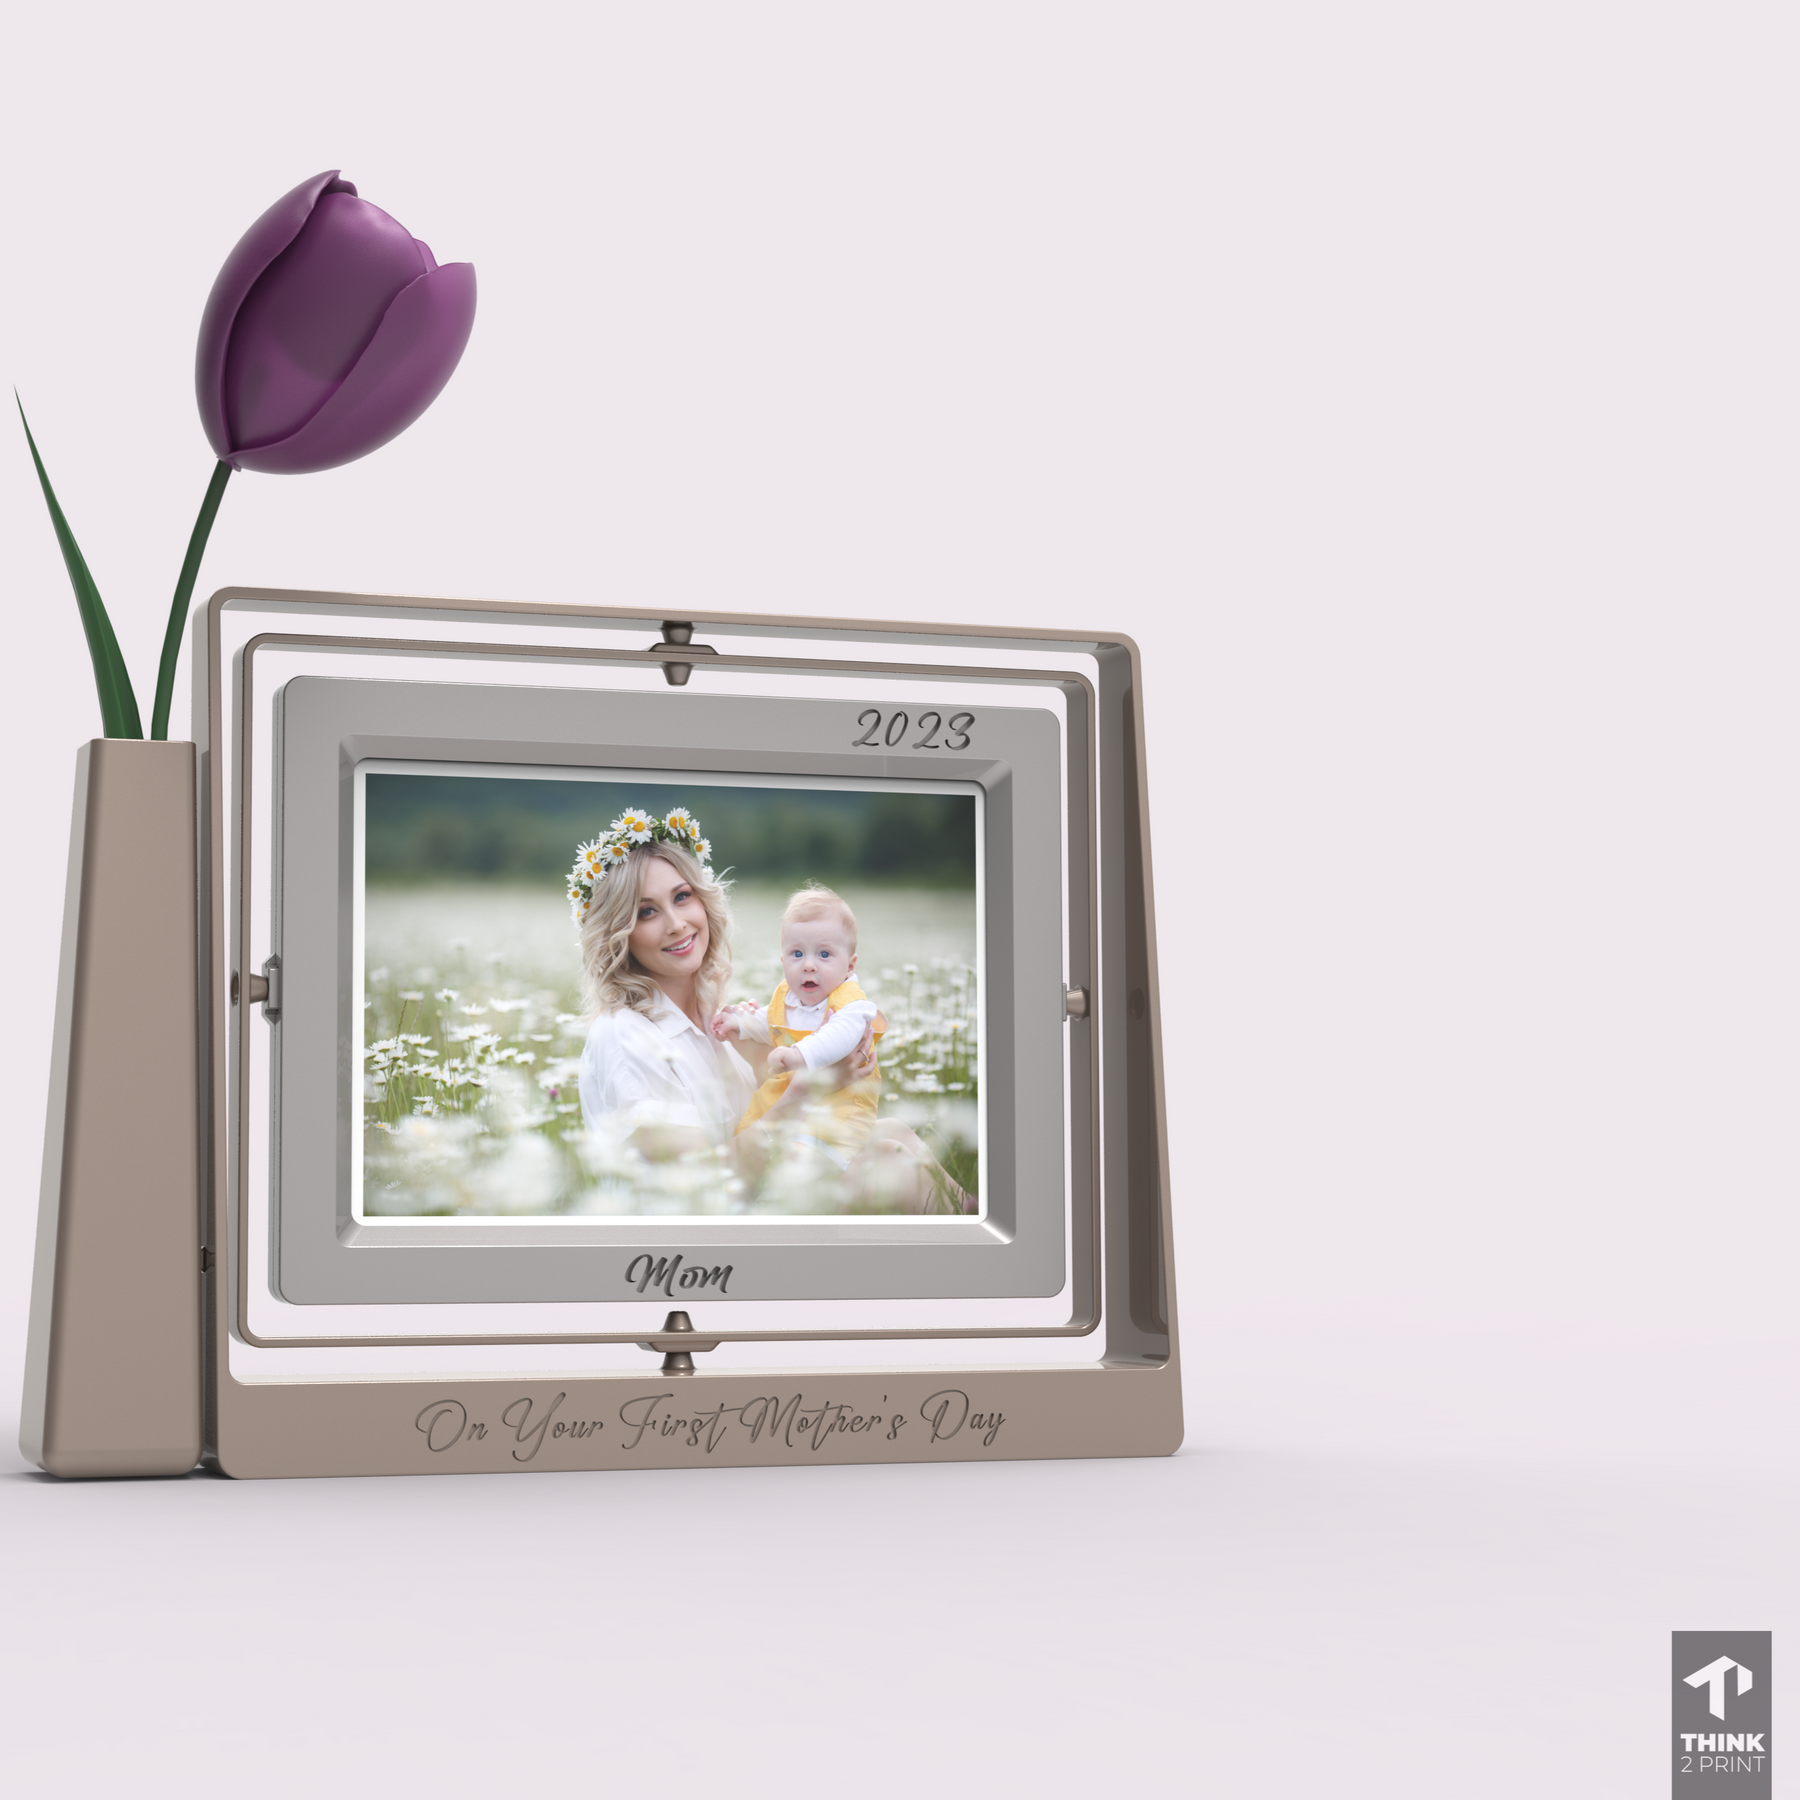 Mothers Day Gift - Print in Place Photo Frame + Vase